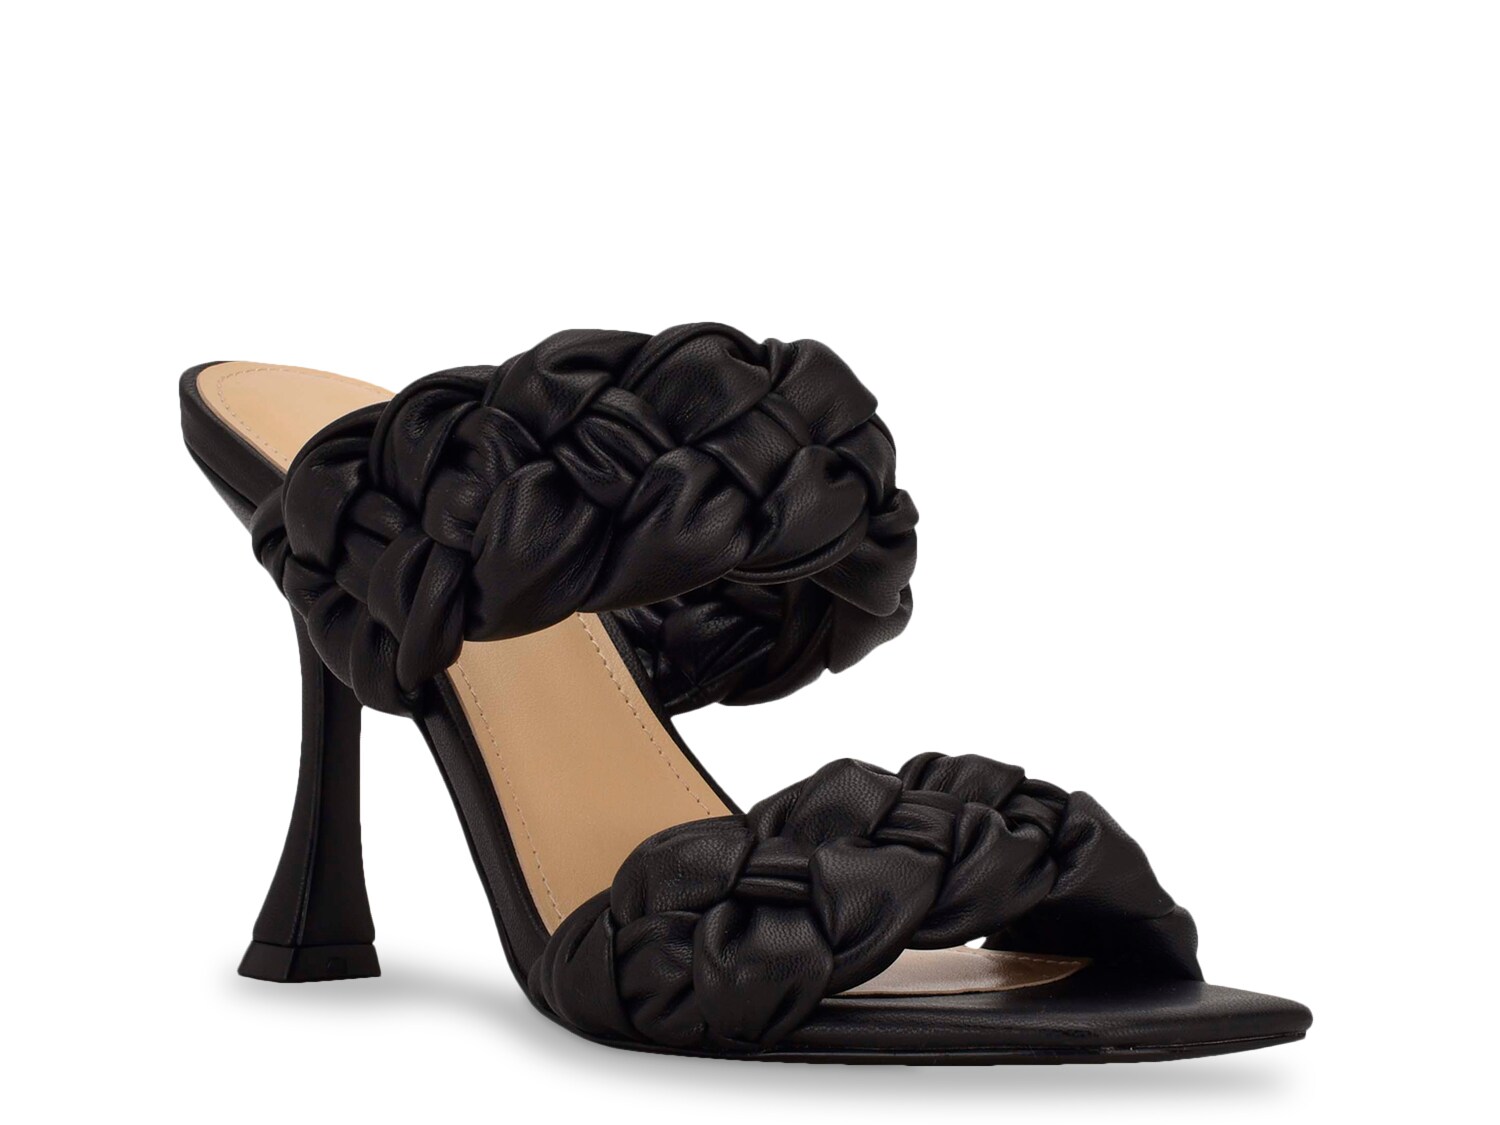 Guess Harlie Sandal - Free Shipping | DSW